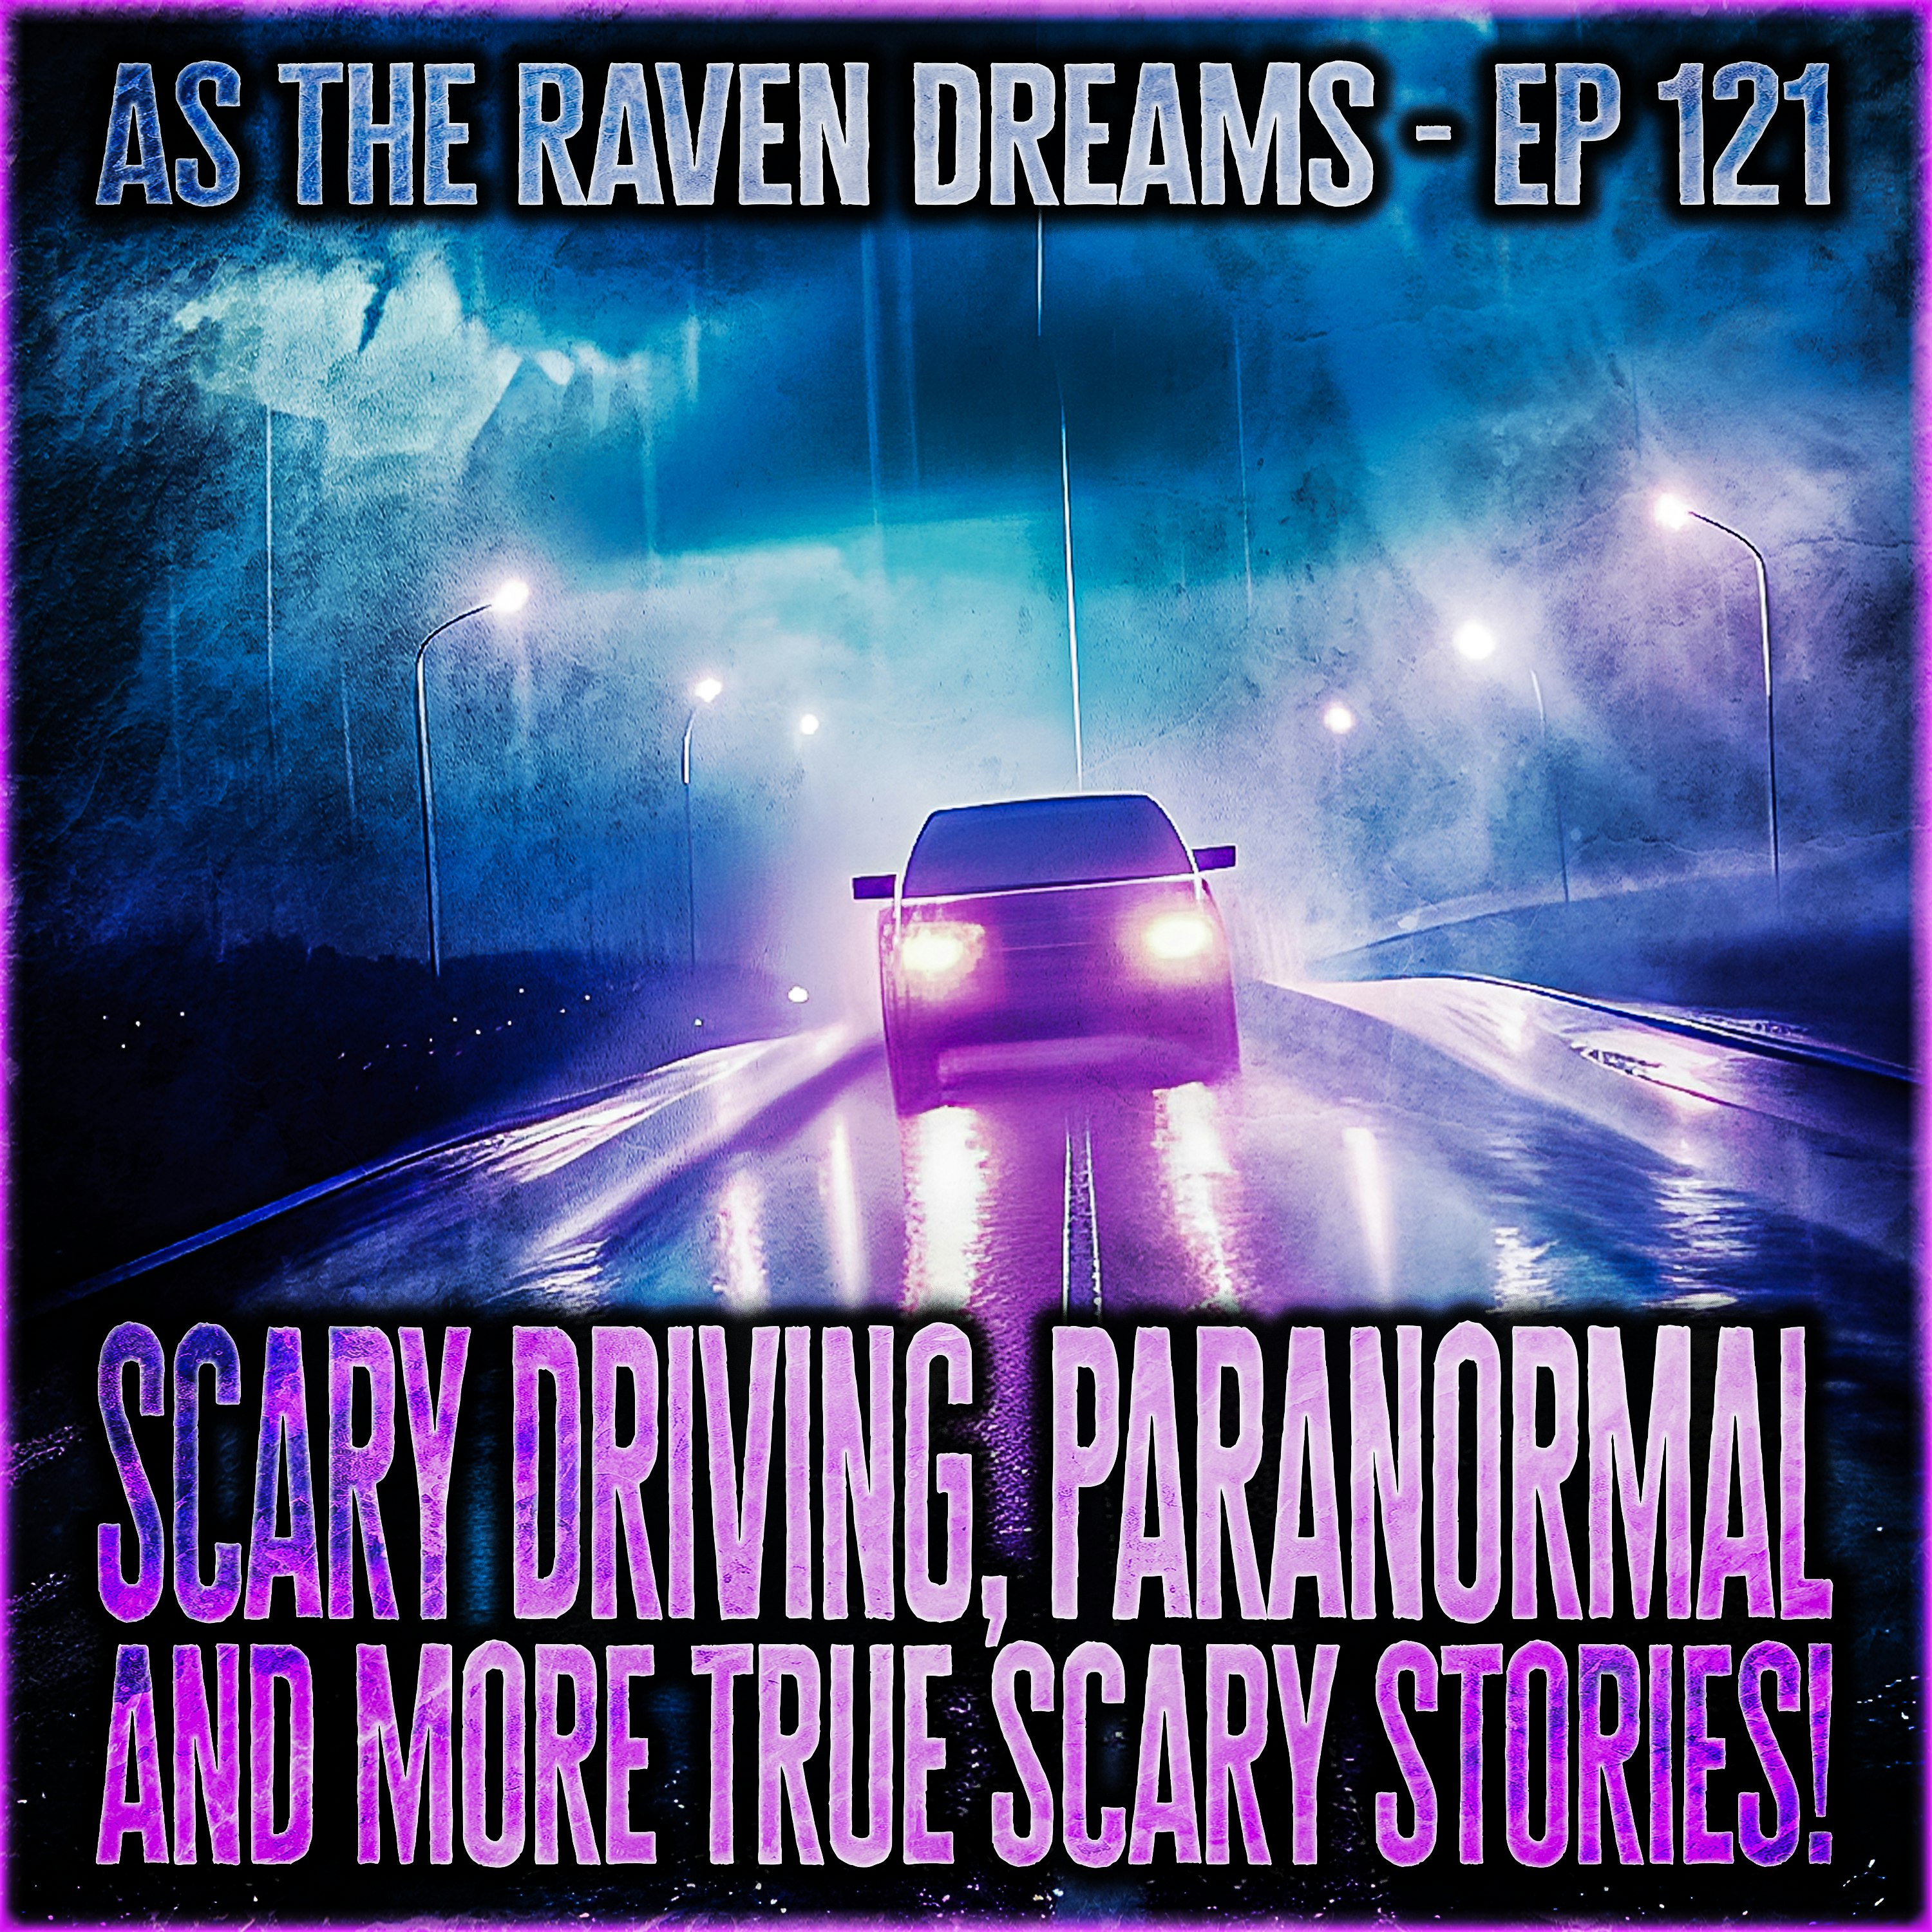 ATRD Ep. 121 - Scary Driving, Paranormal, Party and Parallel Universe Stories - 23 True Scary Stories